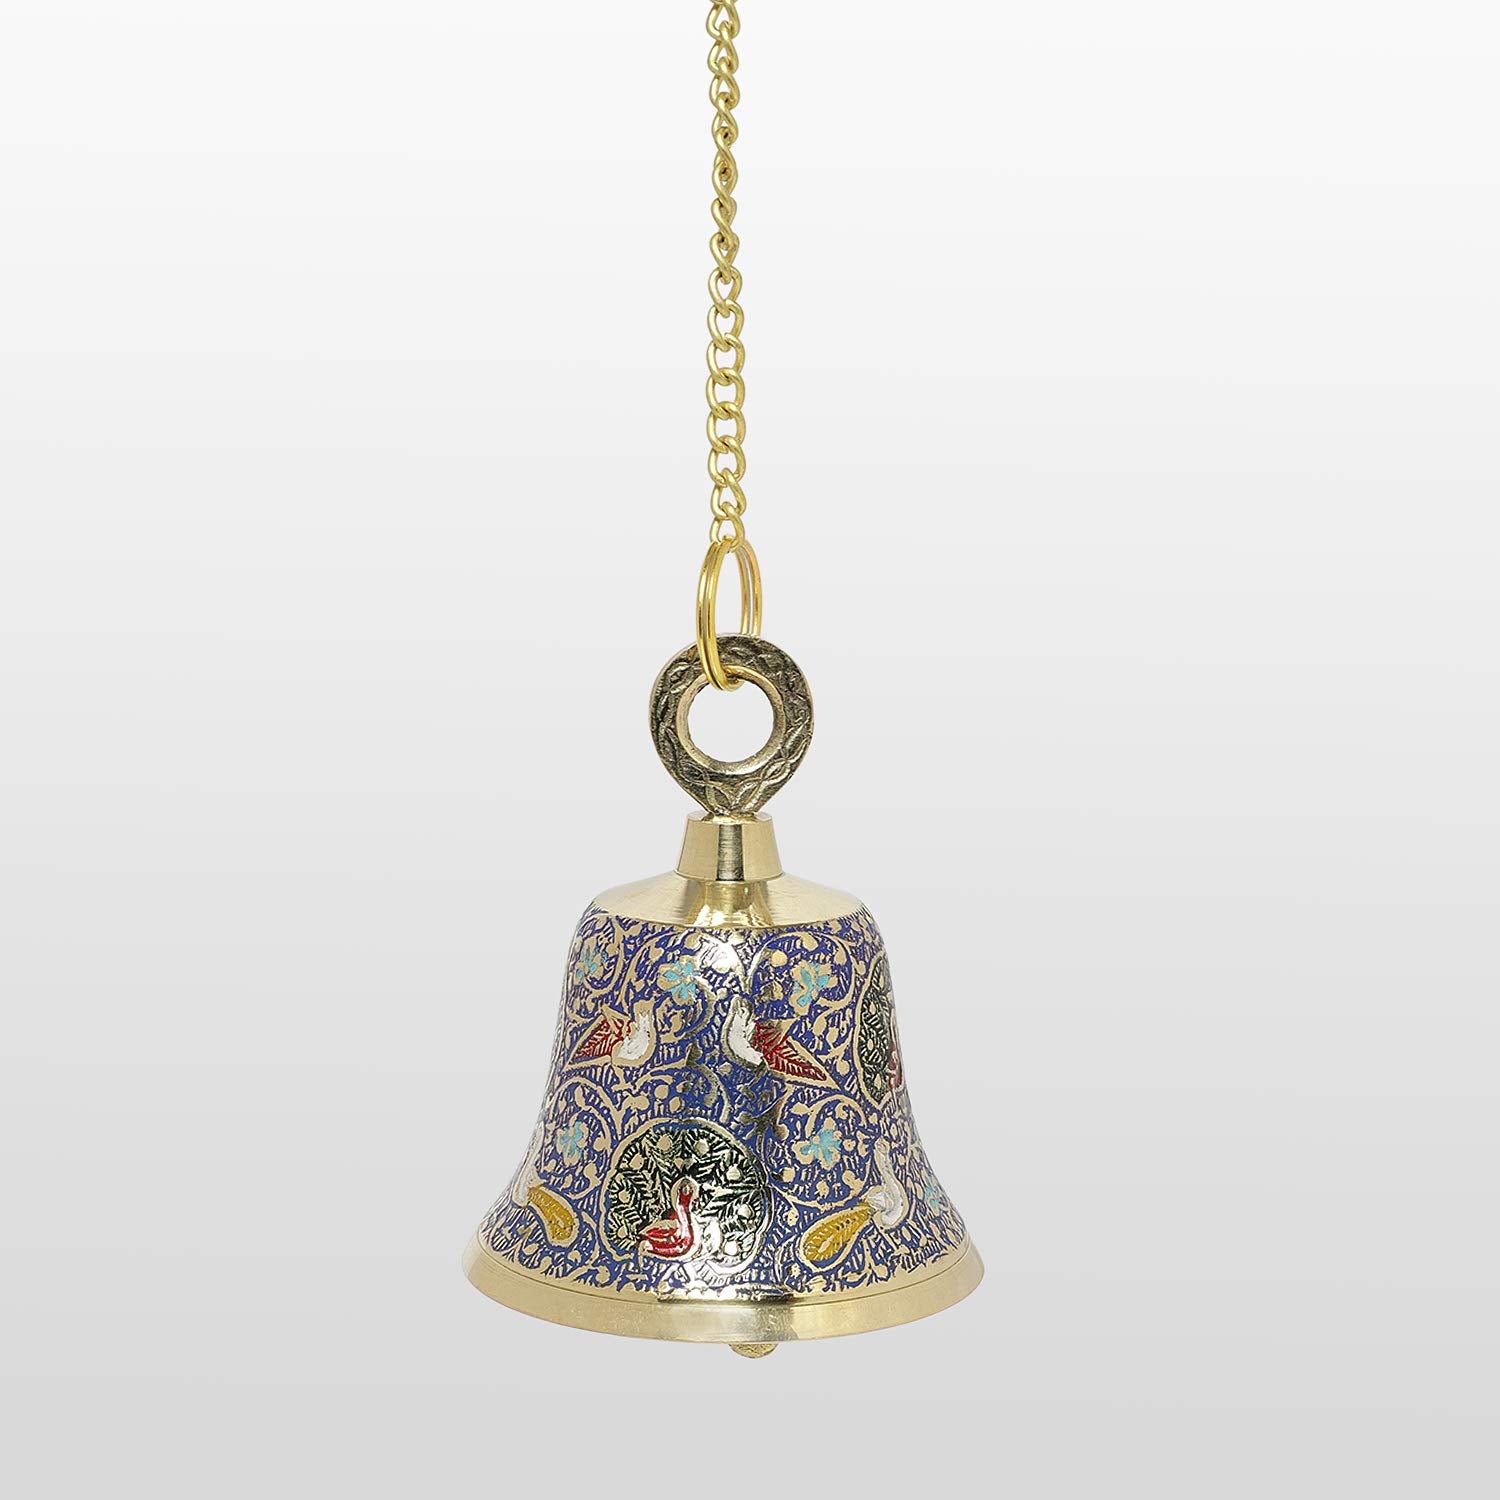 The Bombay Store Brass Engraved Temple Bell Small (Assorted Designs)